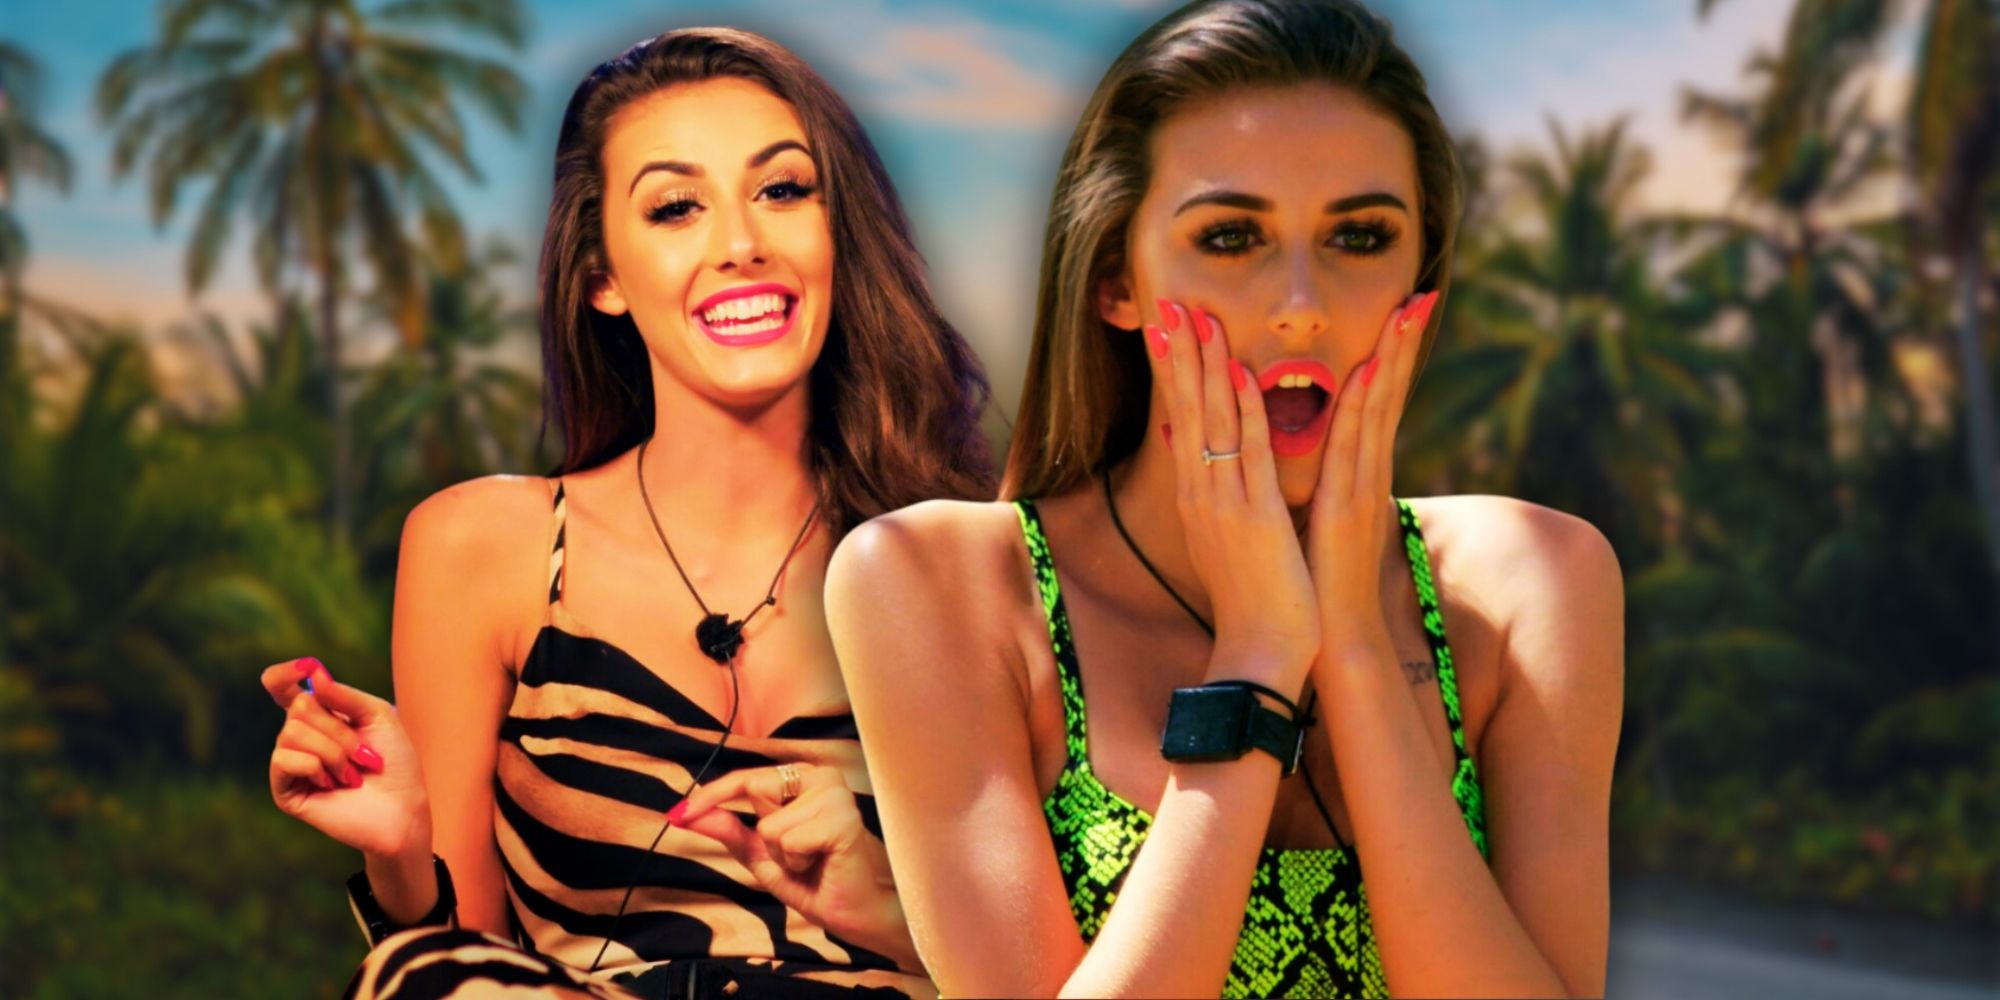 Montage of Too Hot To Handle's Chloe Veitch smiling and looking shocked